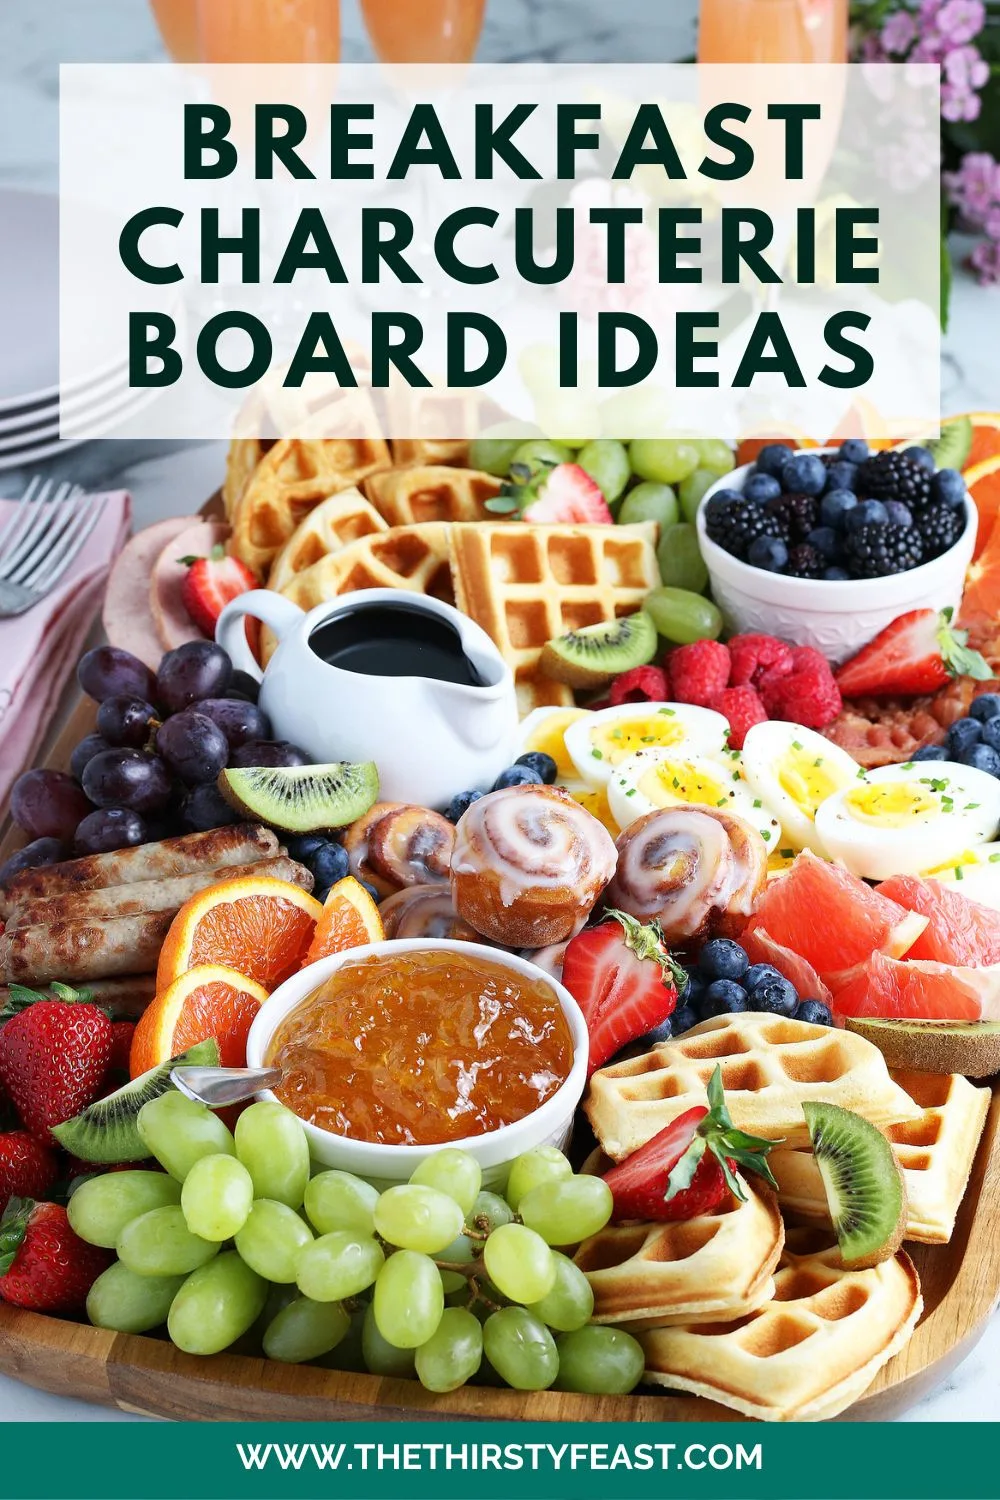 Pinterest image for brunch charcuterie boards with text overlay that says "breakfast charcuterie board ideas"